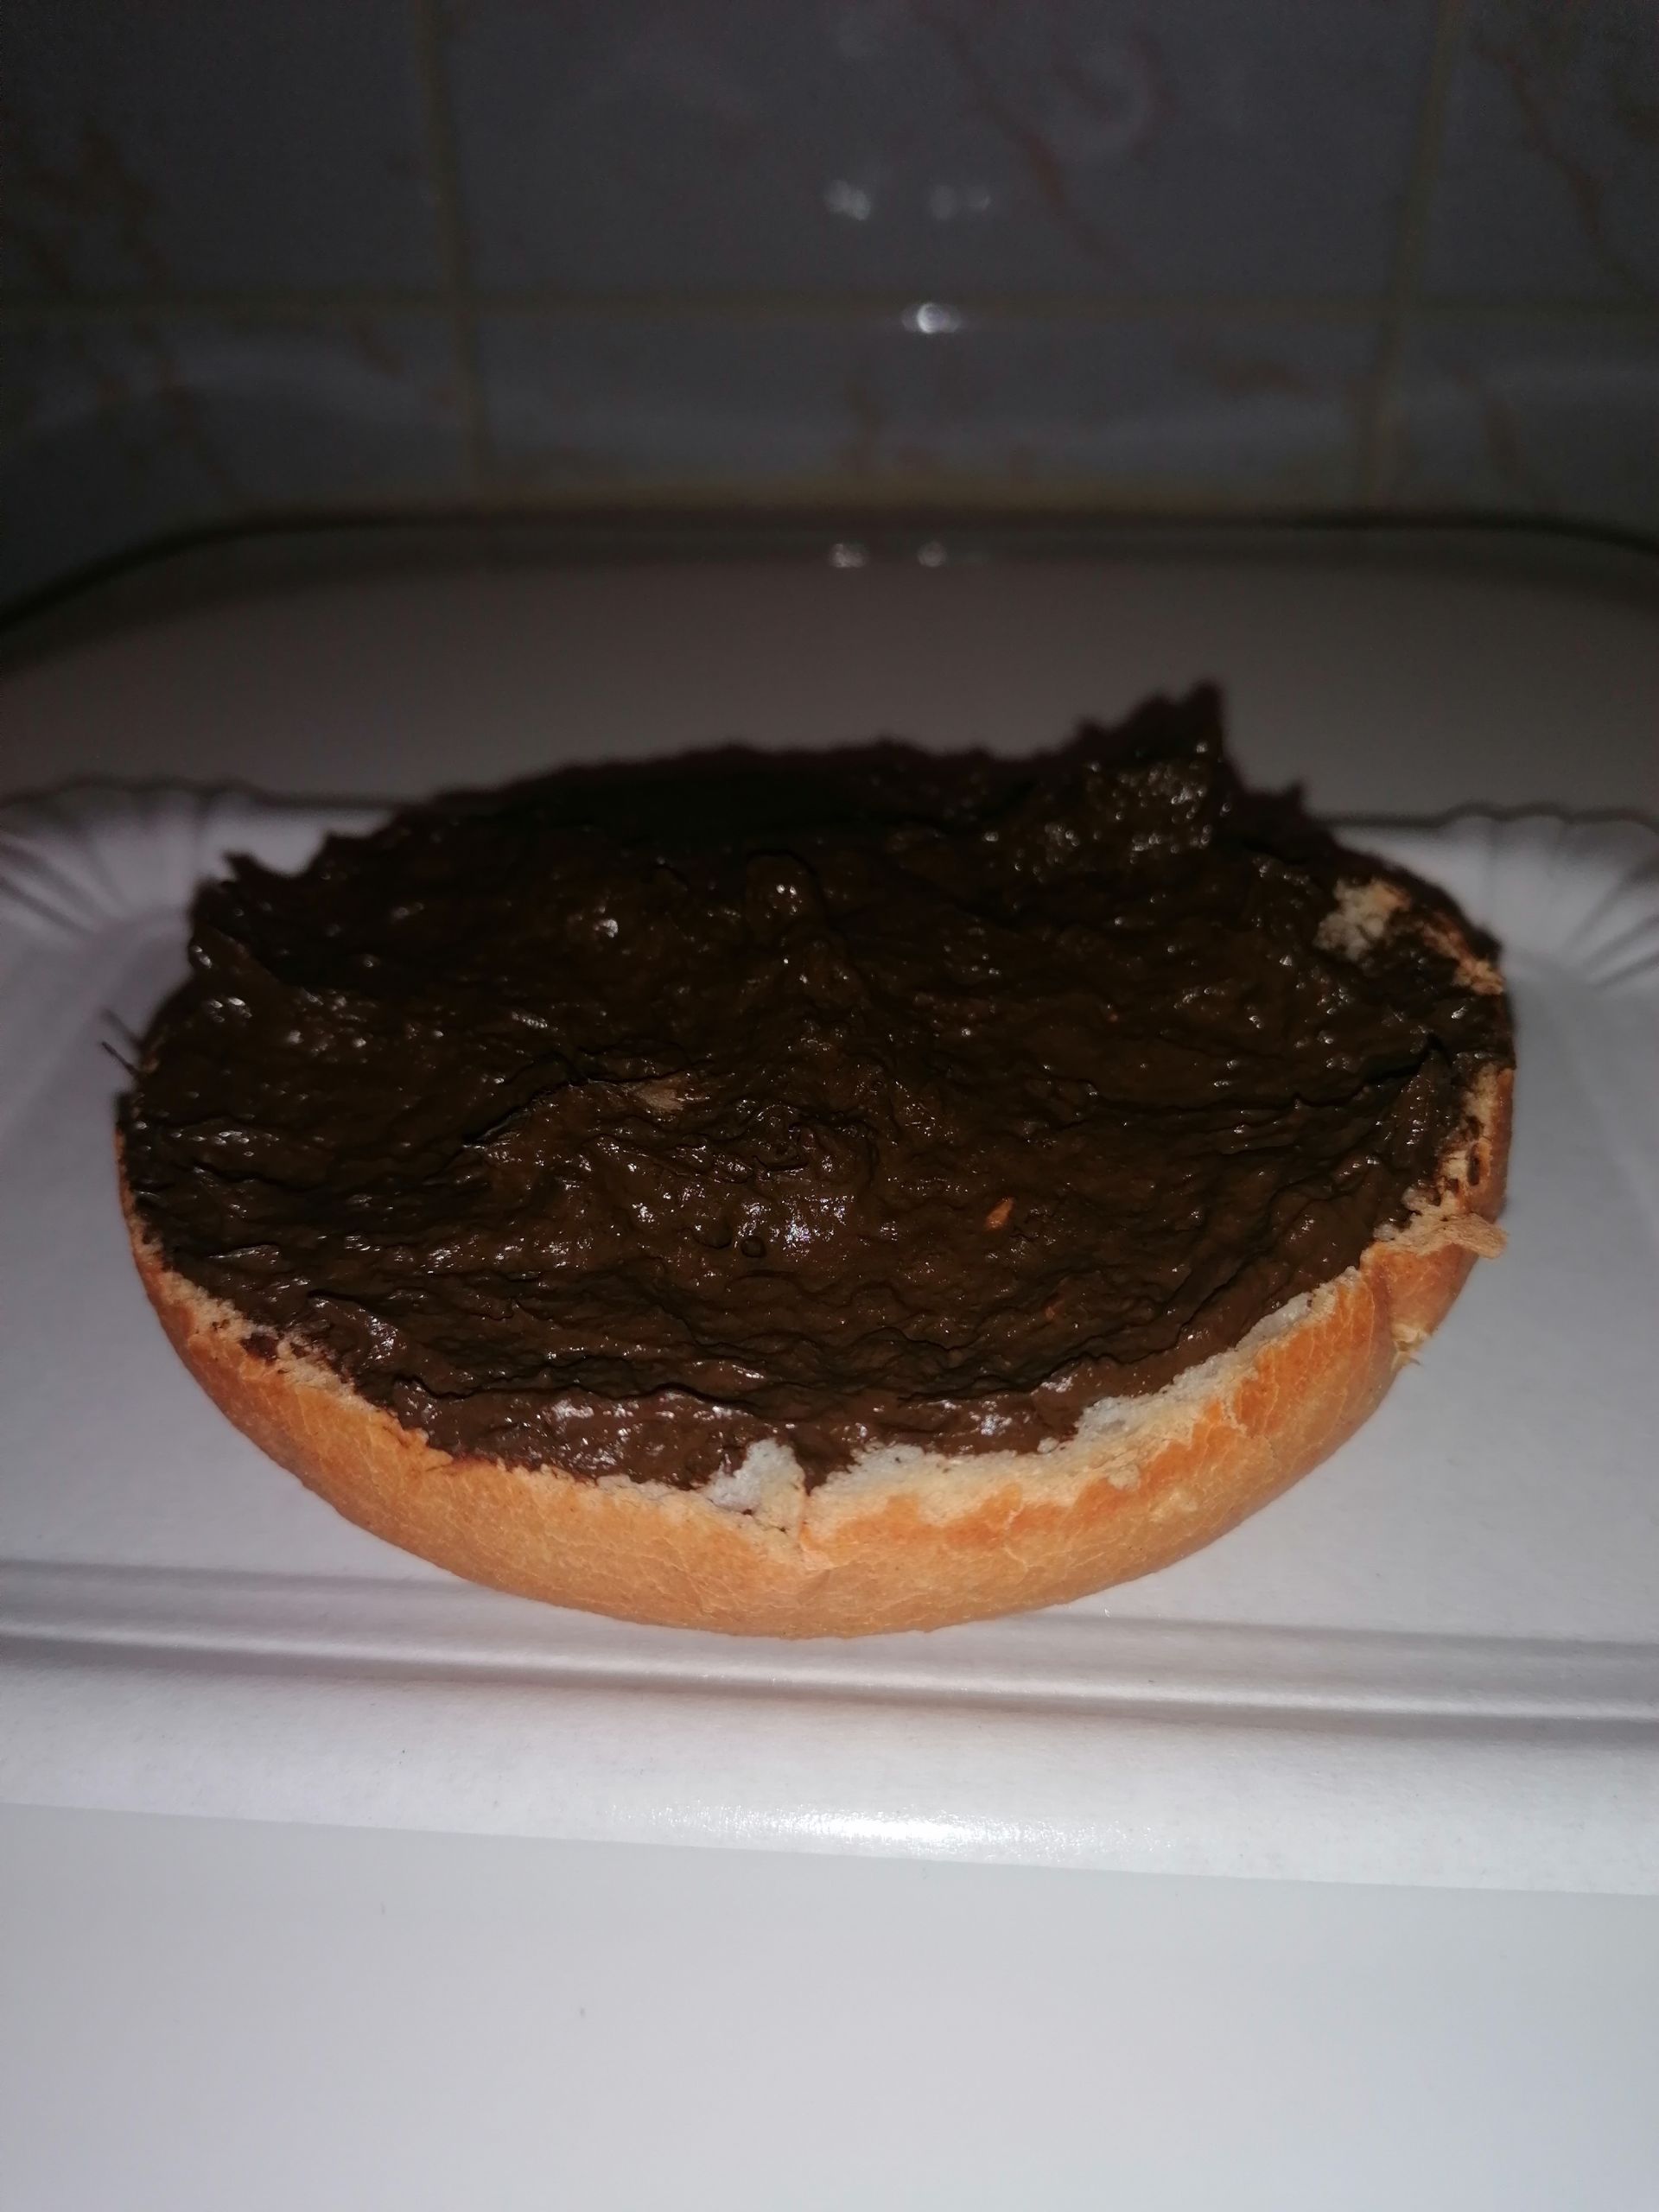 Bread roll with shit looks like Nutella